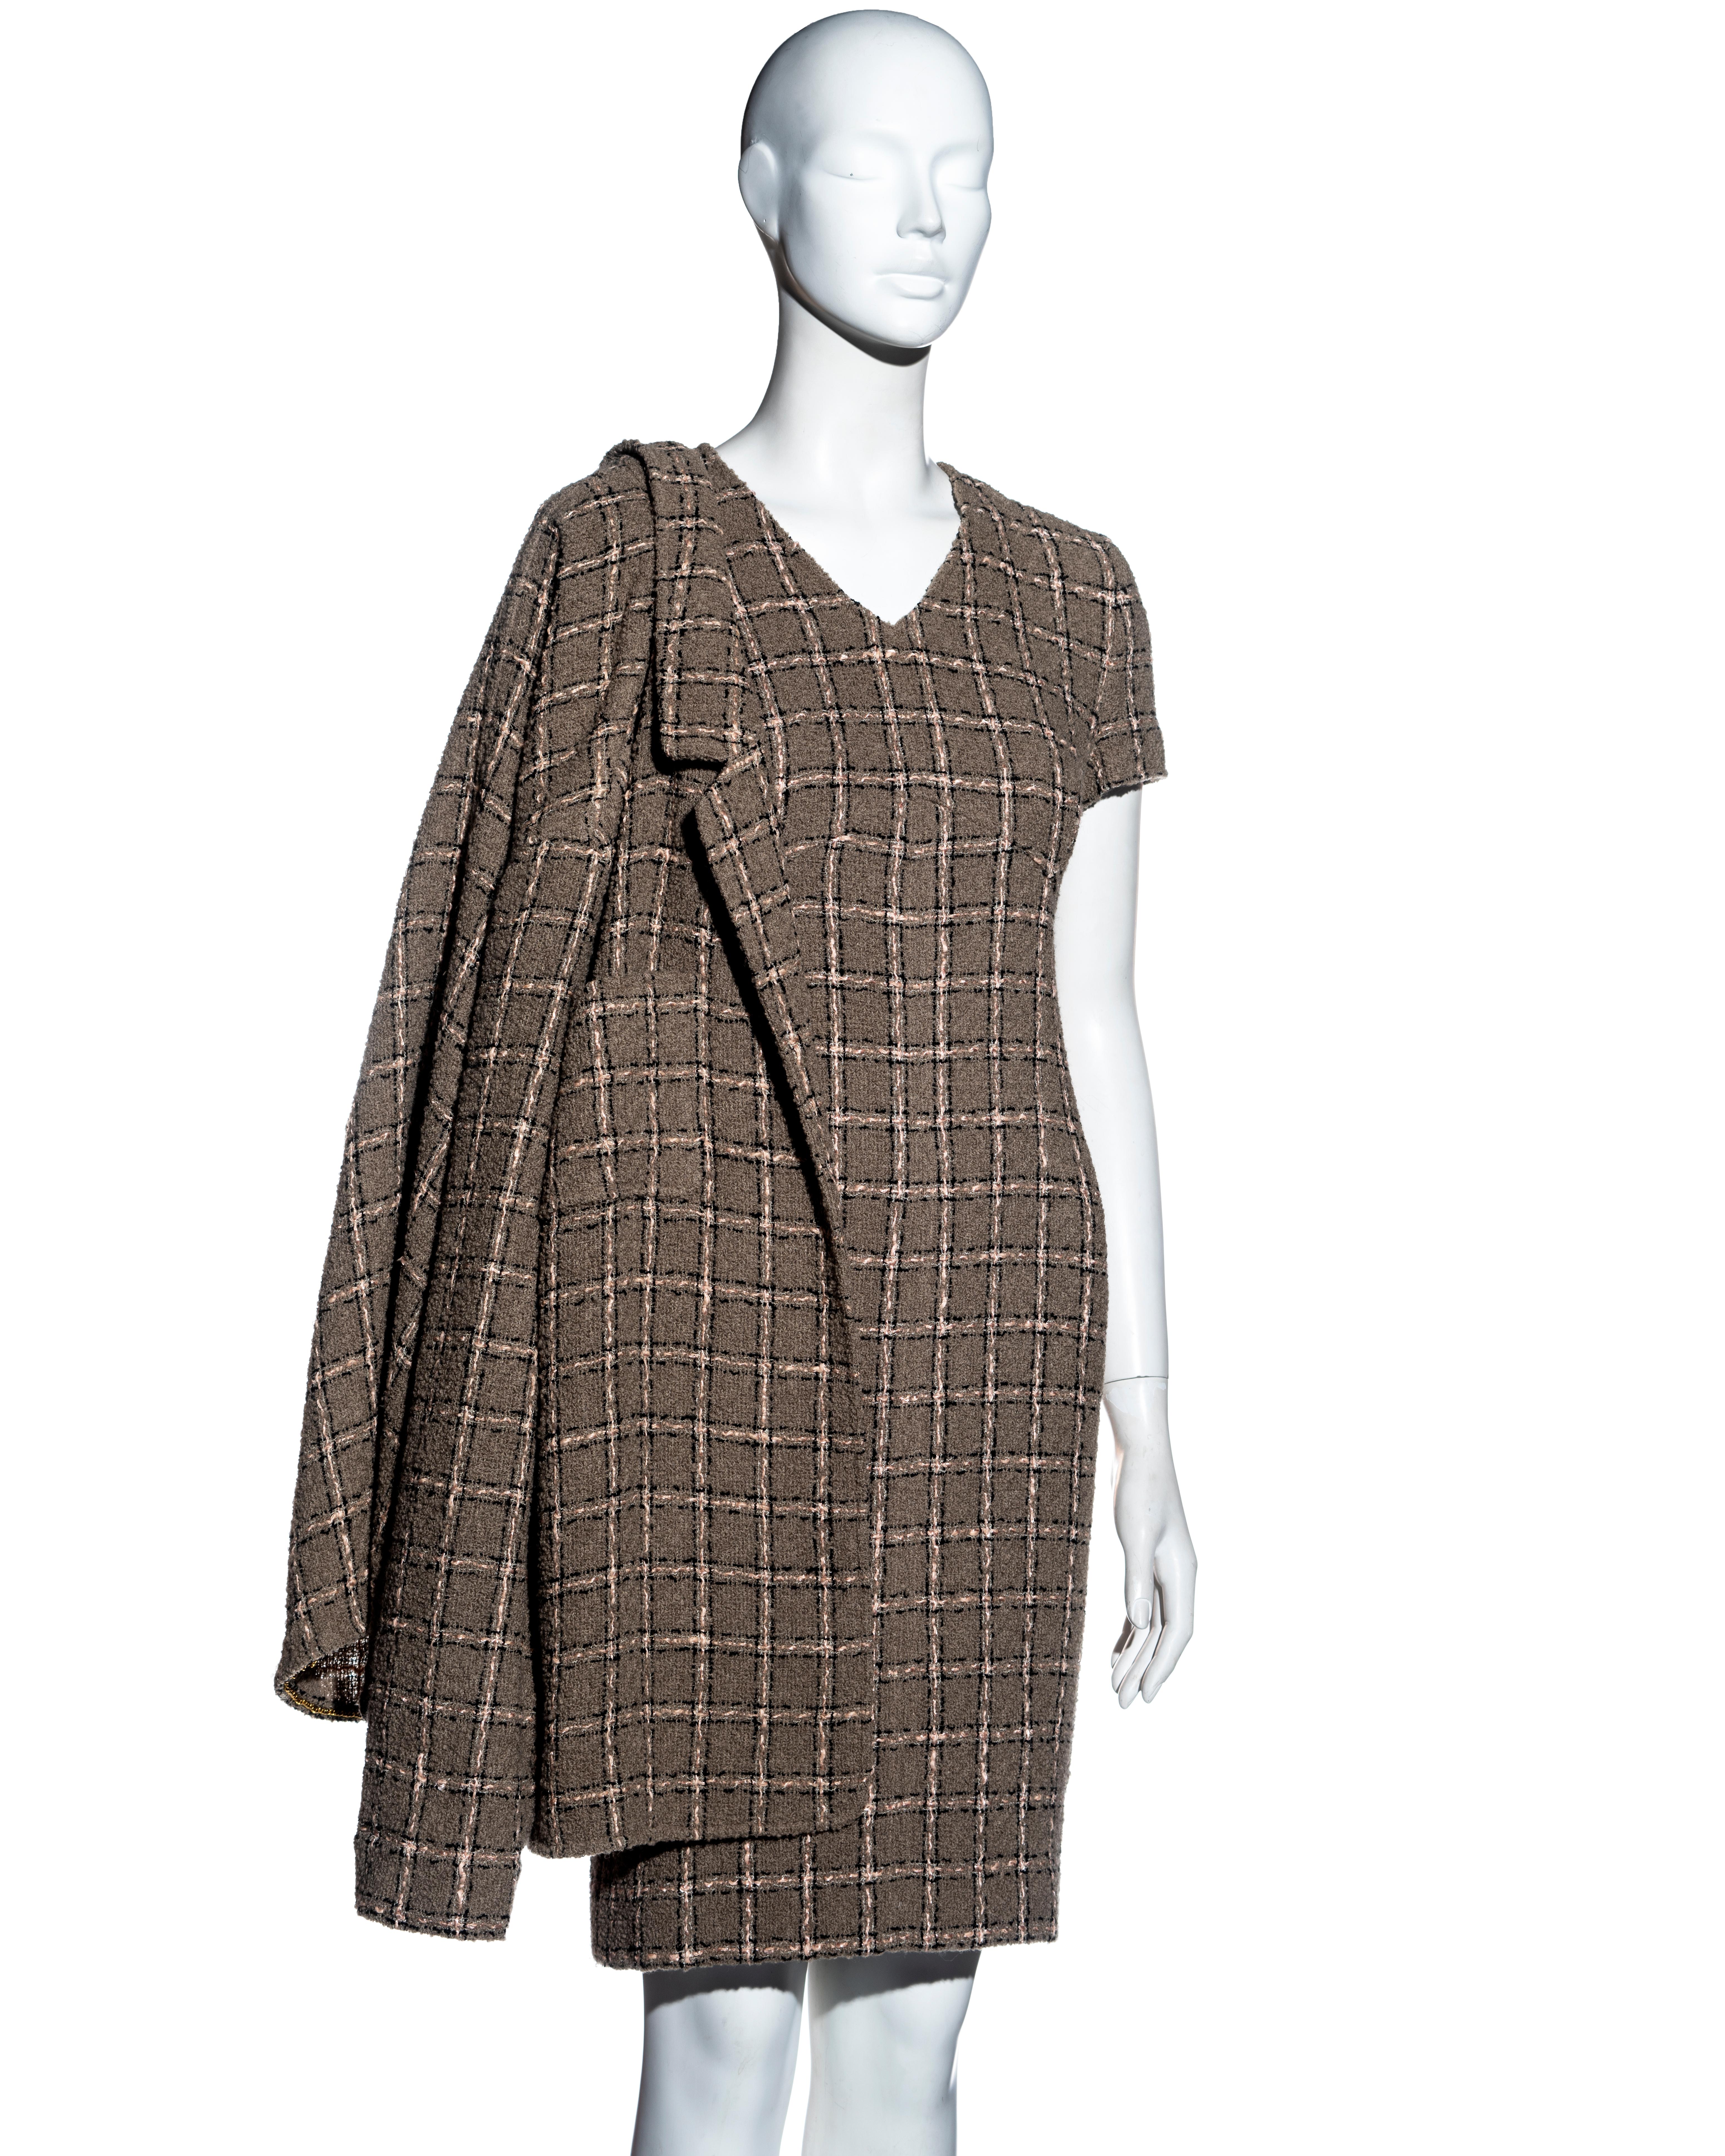 ▪ Chanel taupe and pink checked bouclé wool dress and jacket set
▪ Designed by Karl Lagerfeld
▪ Mid-length sheath dress with short-sleeves and v-neck 
▪ Back vent with gold 'CC' buttons 
▪ Silk lining
▪ Unlined loose-cut jacket with open front 
▪